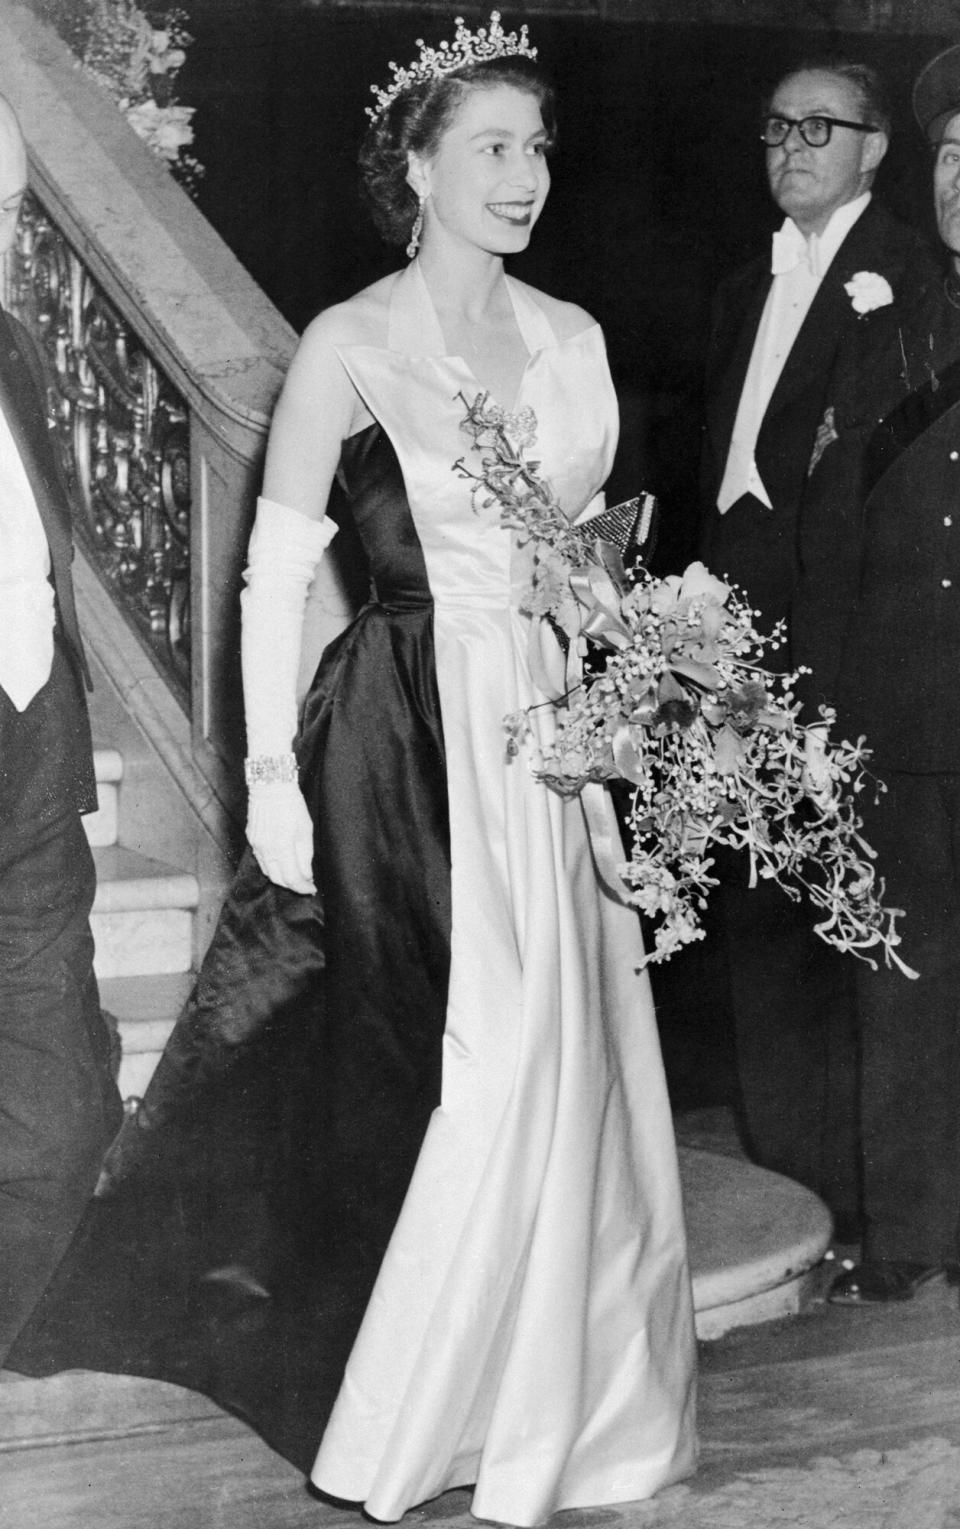 Queen Elizabeth II leaves the Empire Theater in Leicester Square after attending the Royal Film Show. The movie was a musical, titled Because You're Mine.